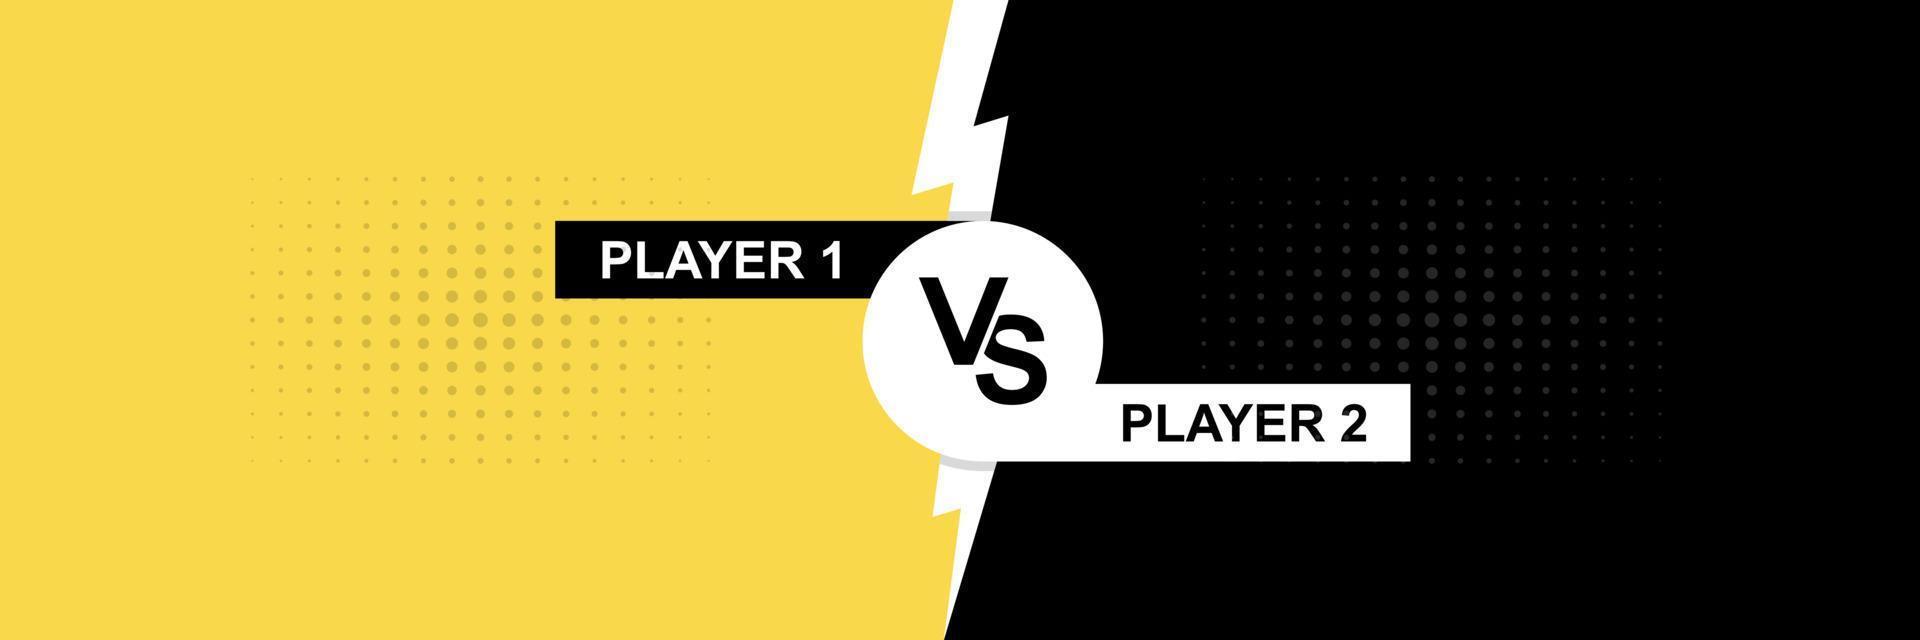 Versus battle background. Player one vs Player two. Vector illustration